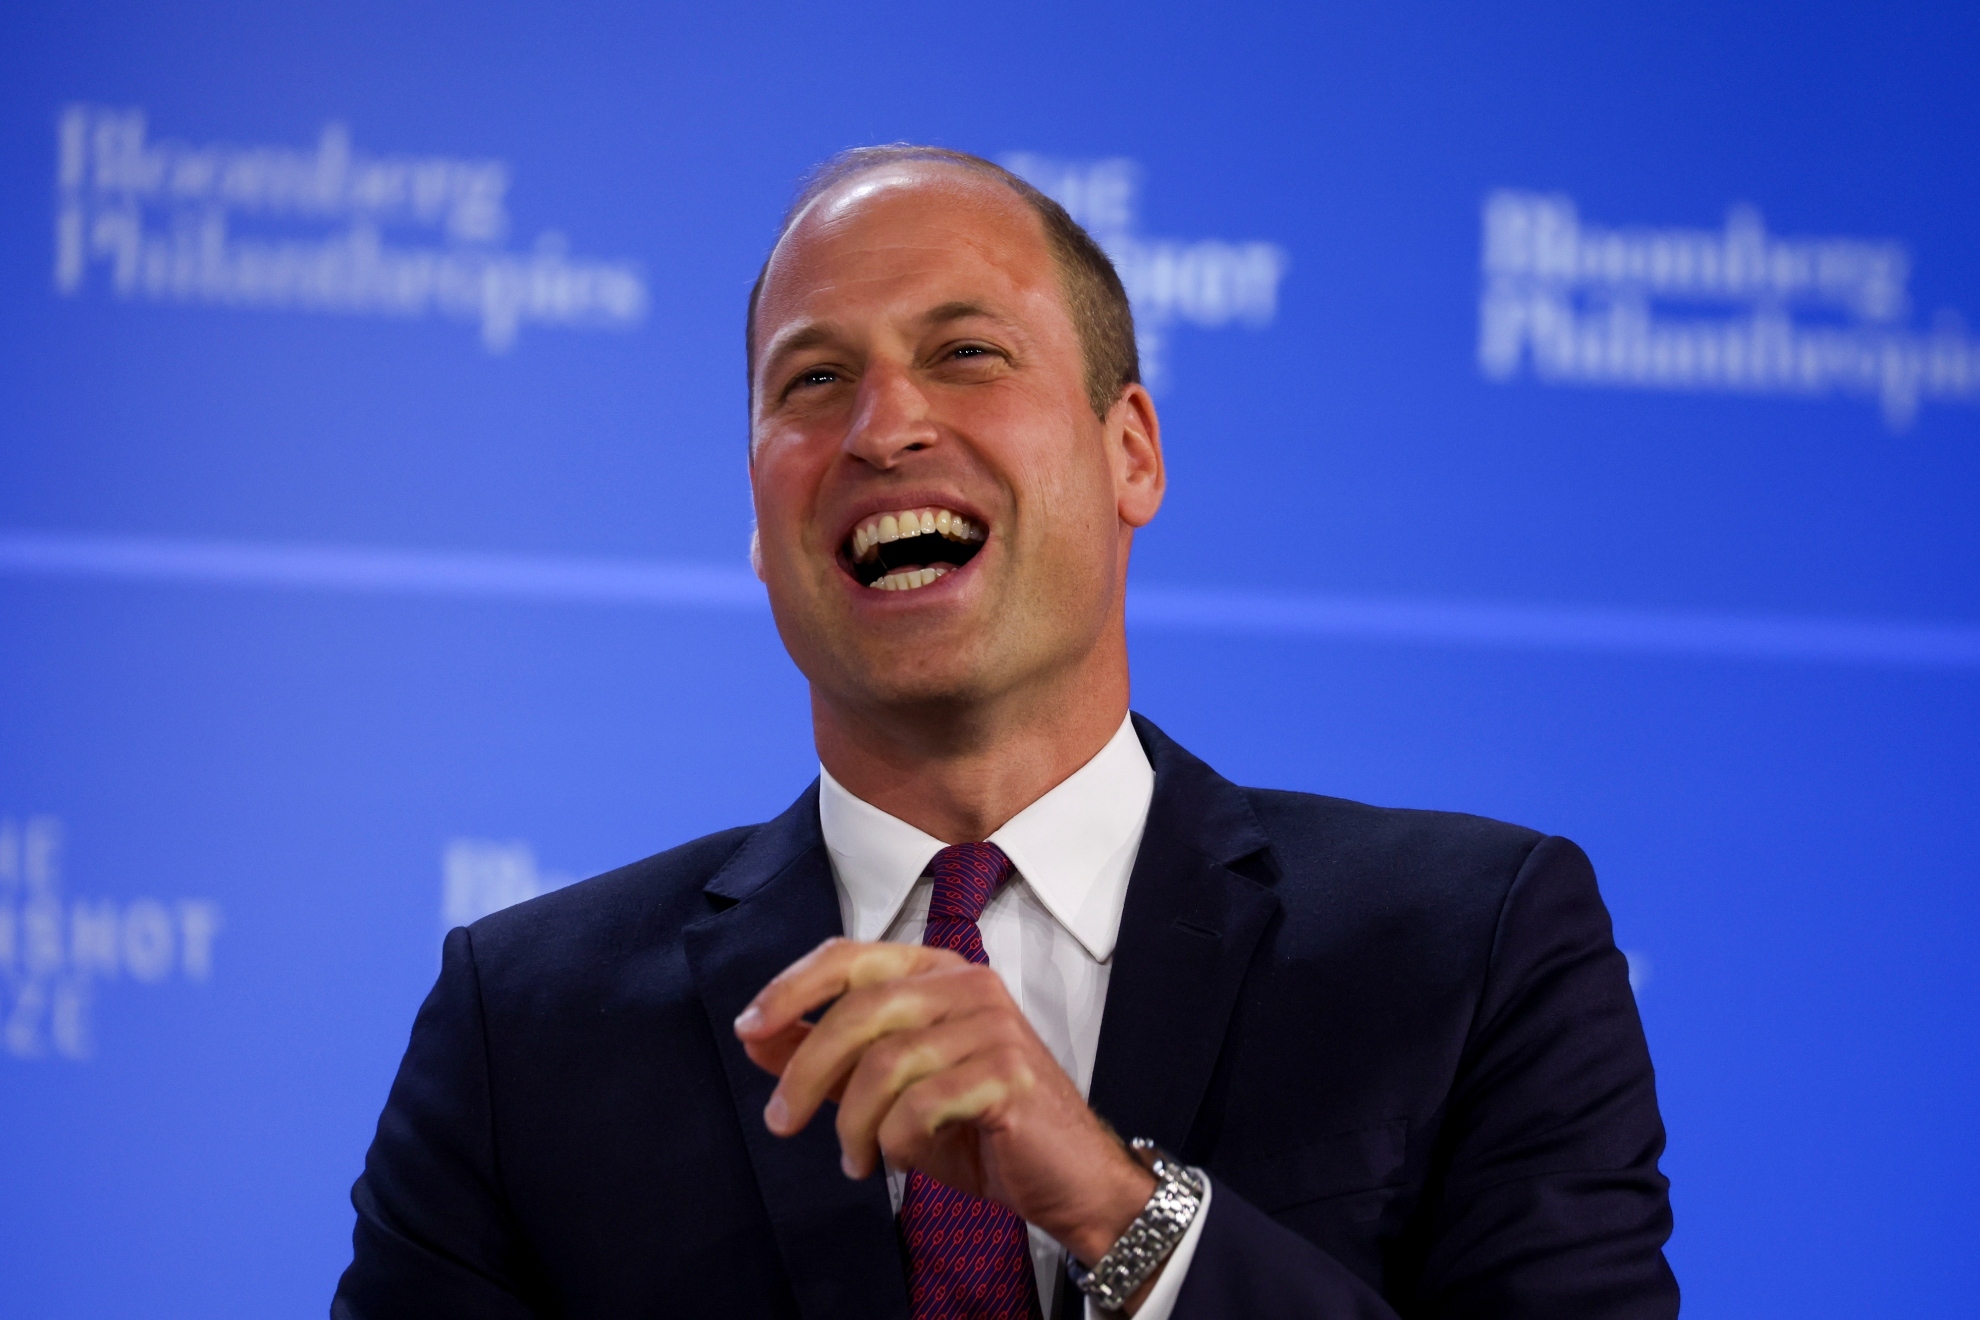 Prince William during a summit in New York City